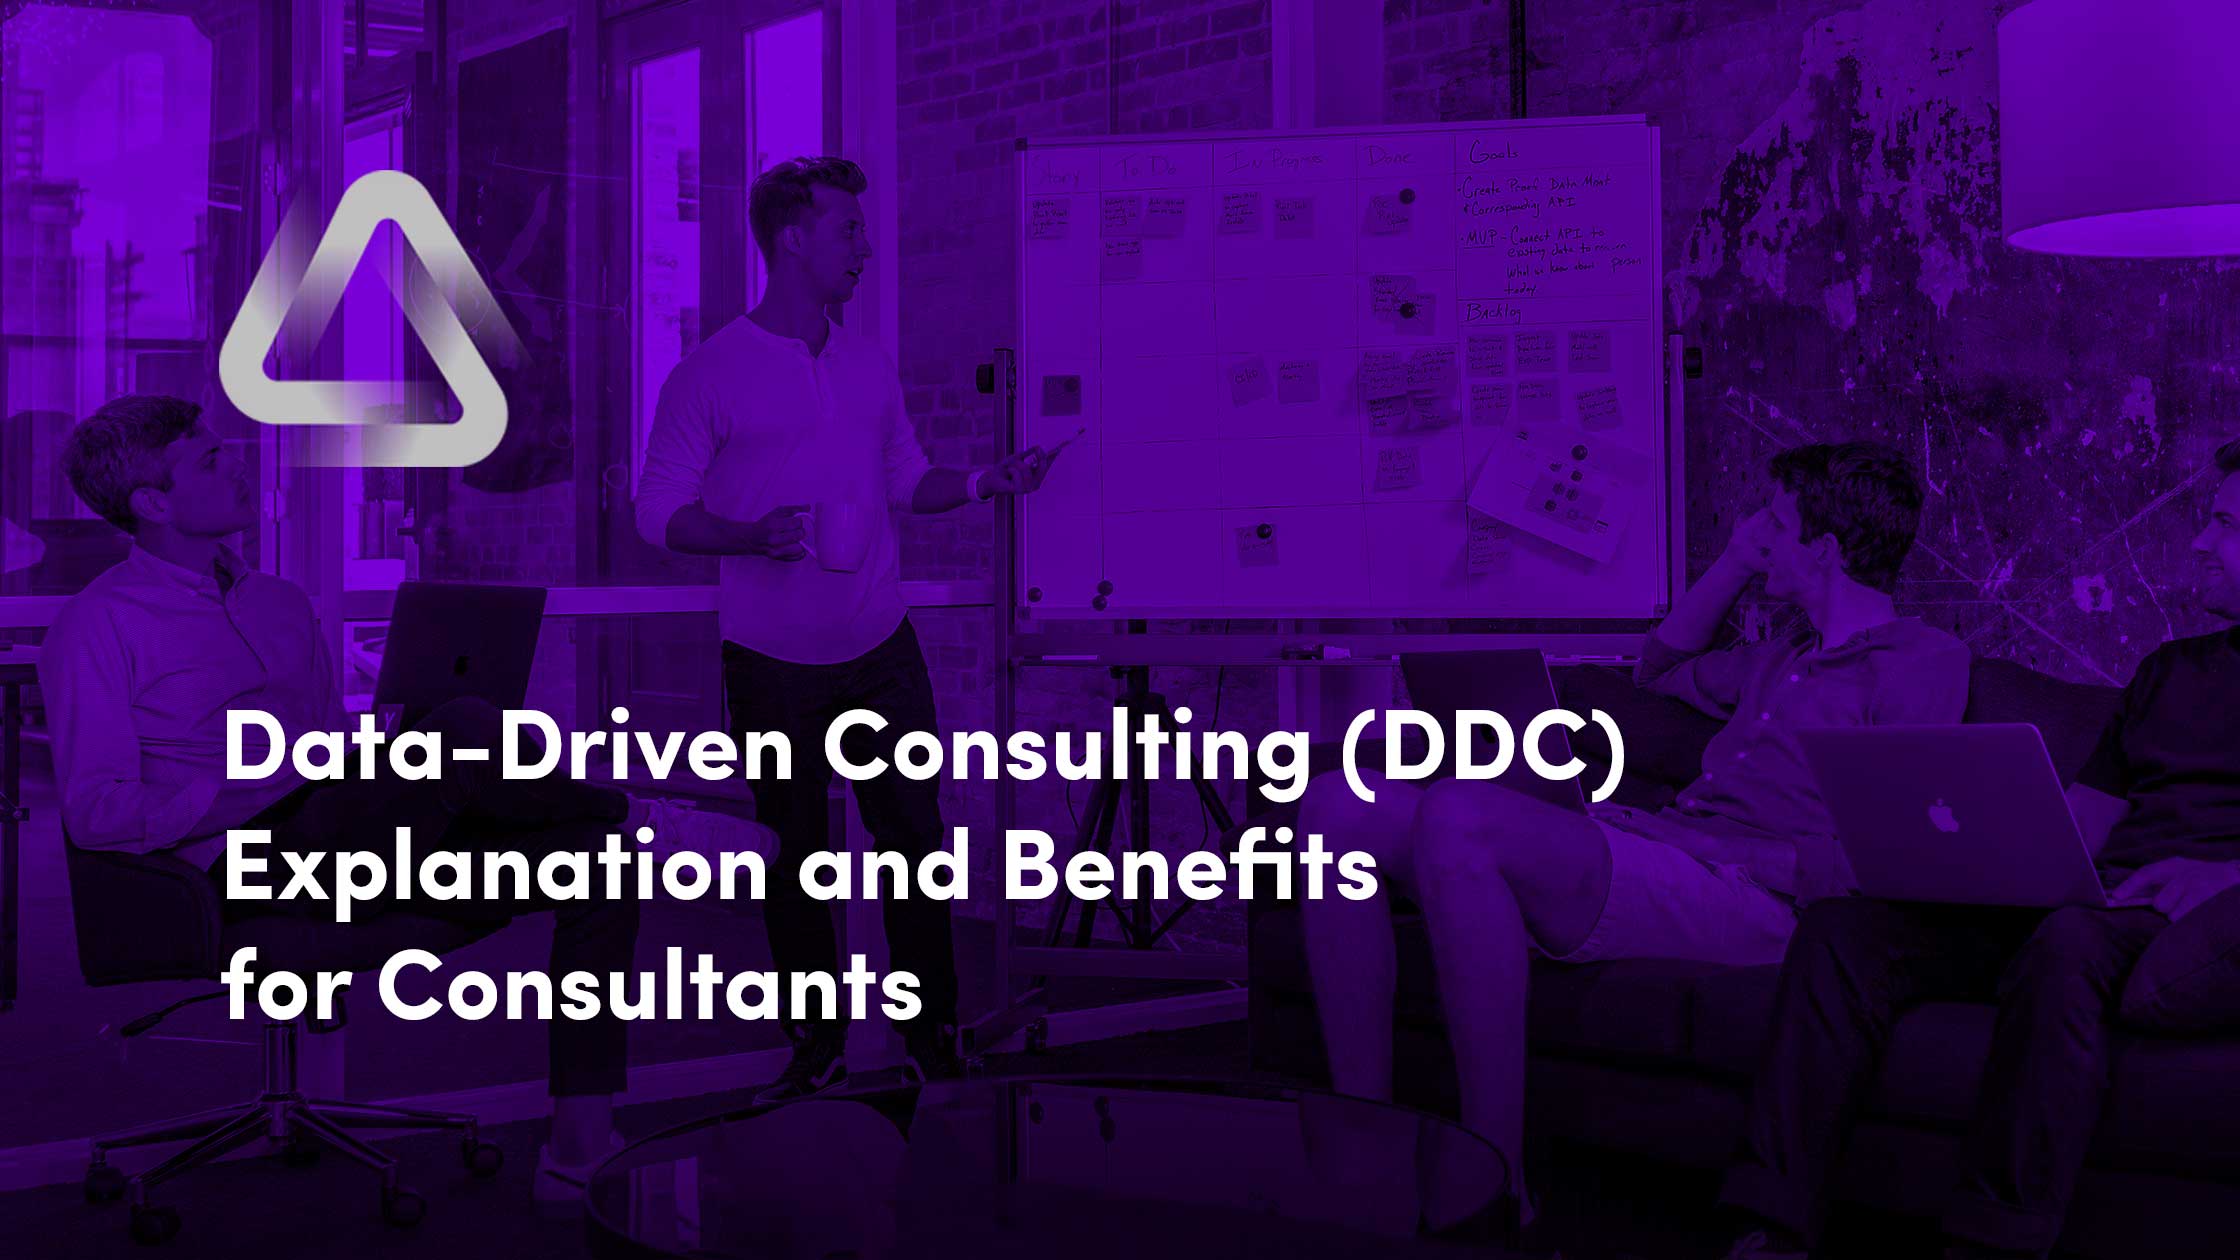 Data-Driven Consulting - What consulting companies need to know incl. the benefits